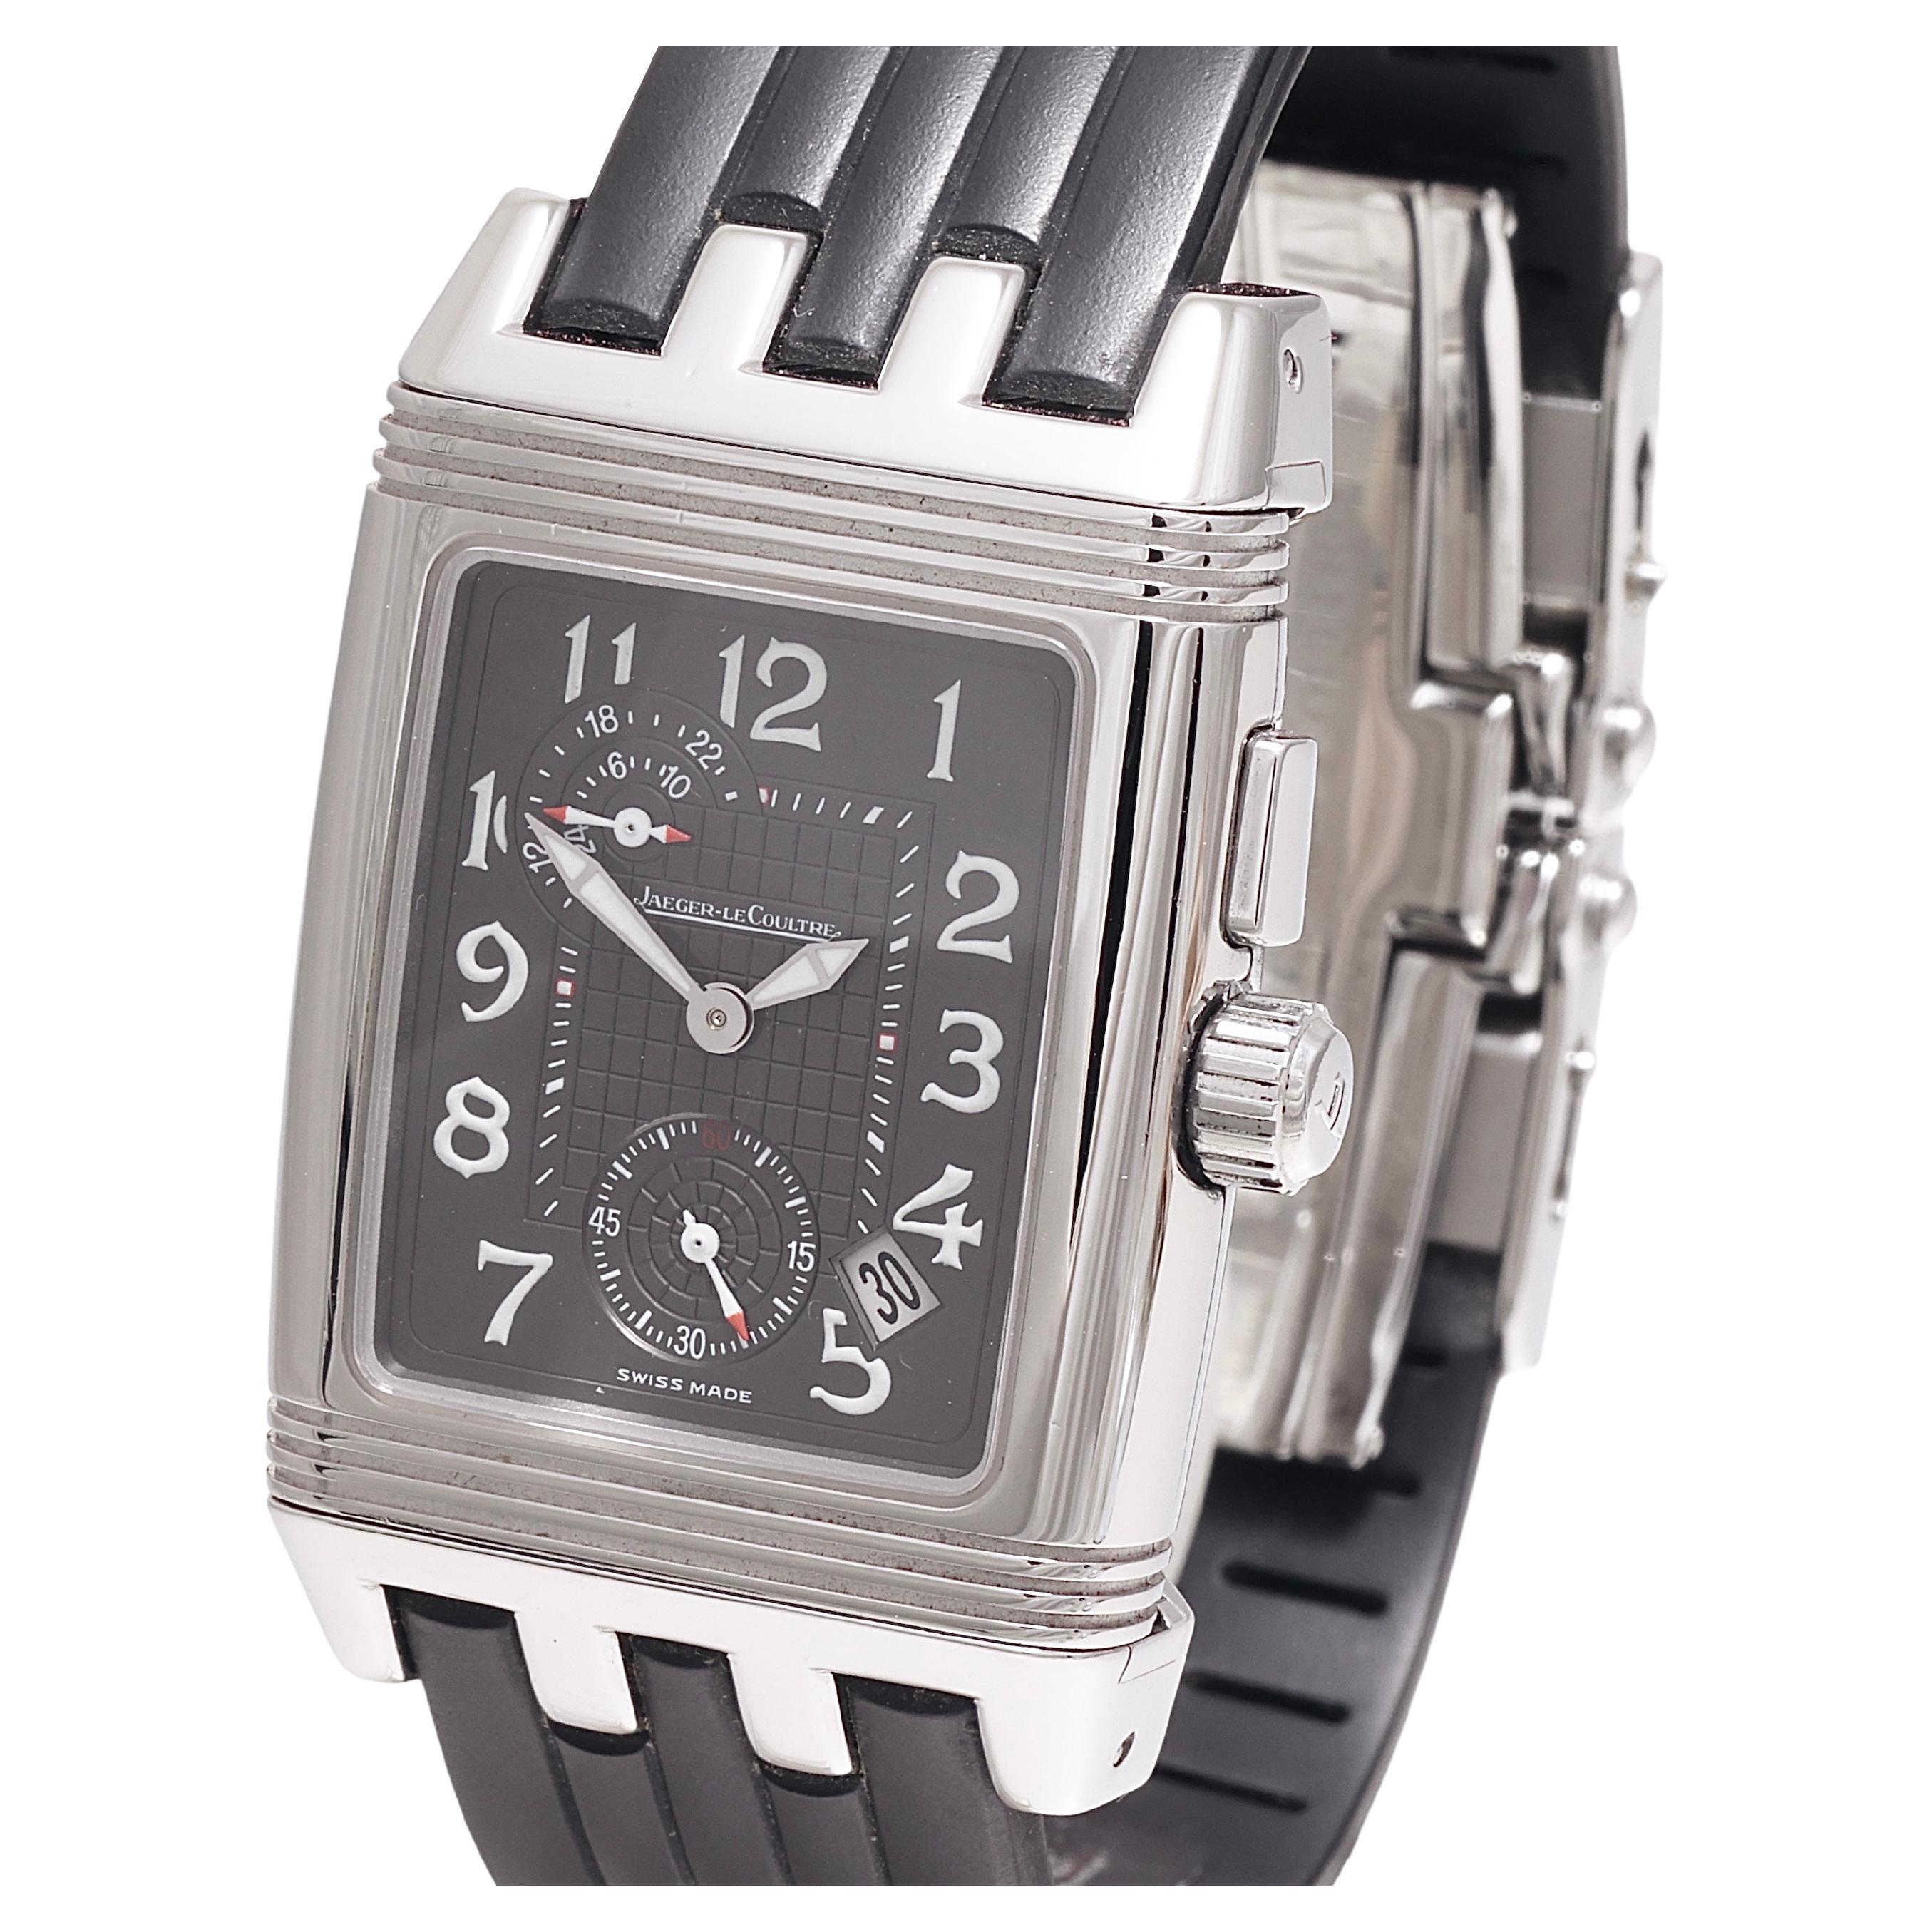 Jaeger LeCoultre Reverso, Gran Sport, Duo Face, GMT, Stahl, Ref 295.8.51